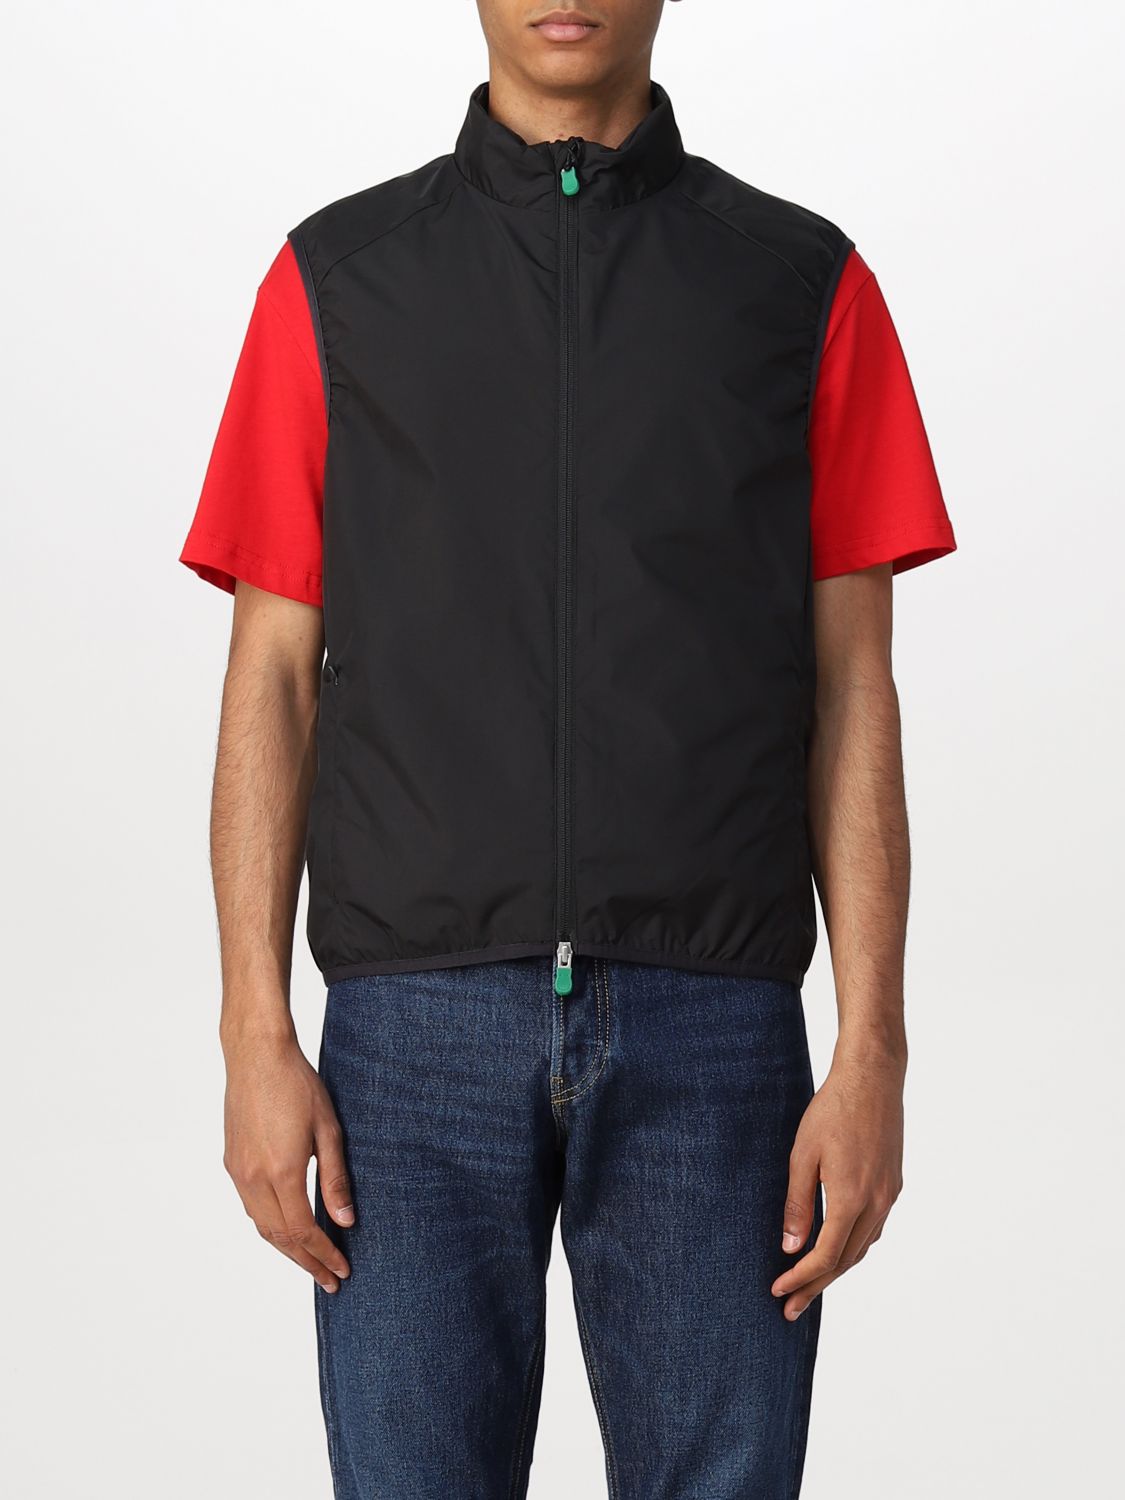 Gilet Save The Duck: Gilet Save The Duck uomo nero 1